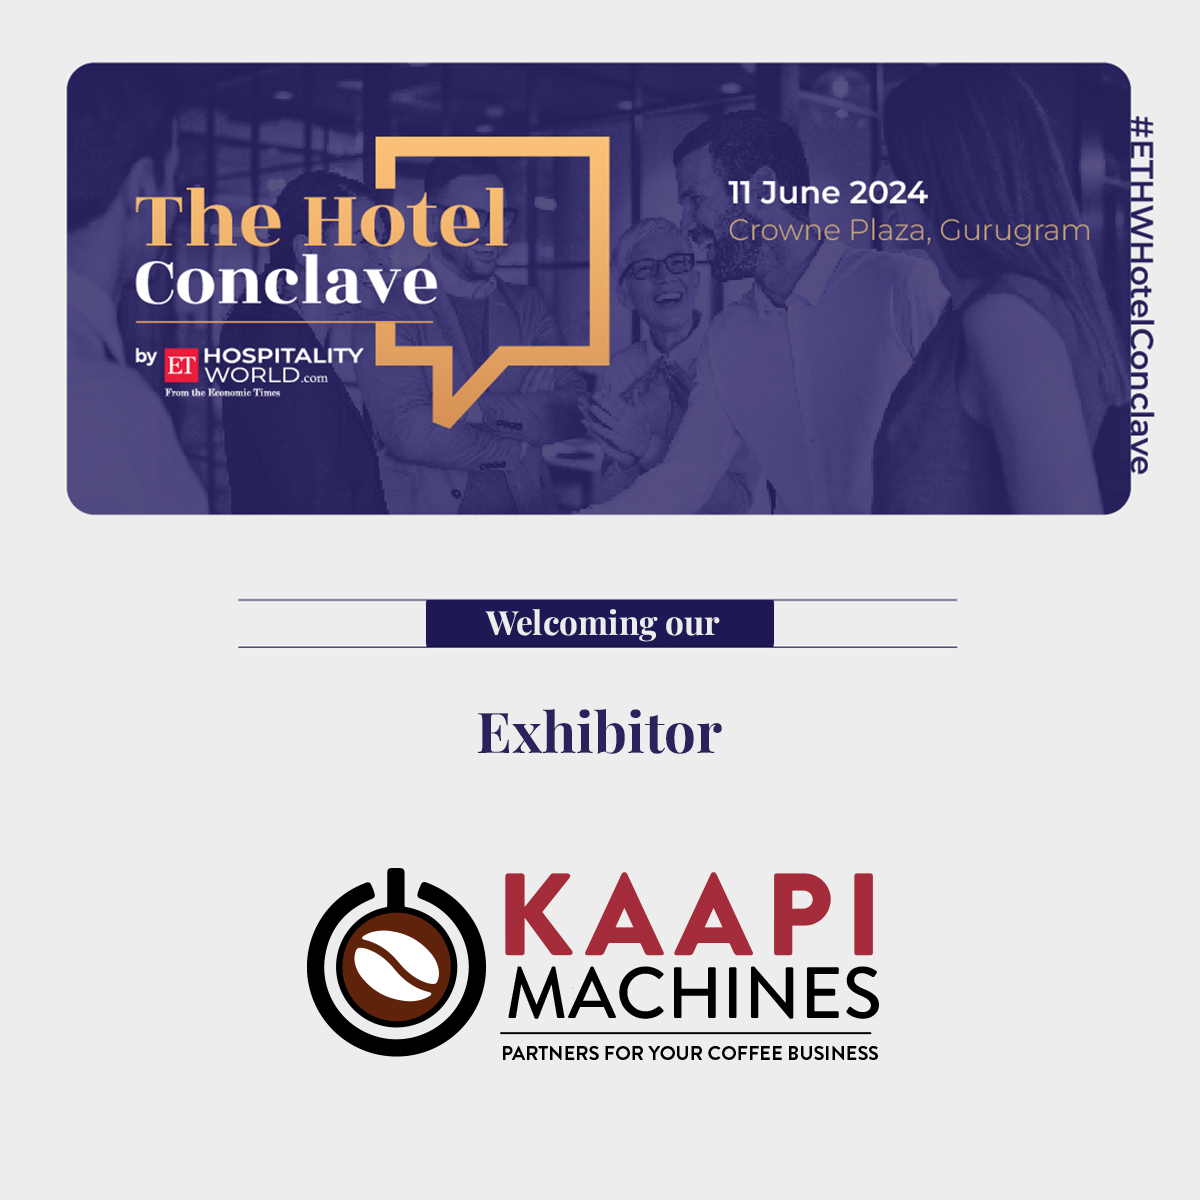 We're honored to have @kaapimachine as our Exhibitor for the #ETHWHotelConclave 2024! Let's collaborate to drive innovation in the industry.

Register Now: bit.ly/3V4PZVn

#ETHospitalityWorld #HospitalityIndustry #Summit #EconomicTimes #Development #Innovation